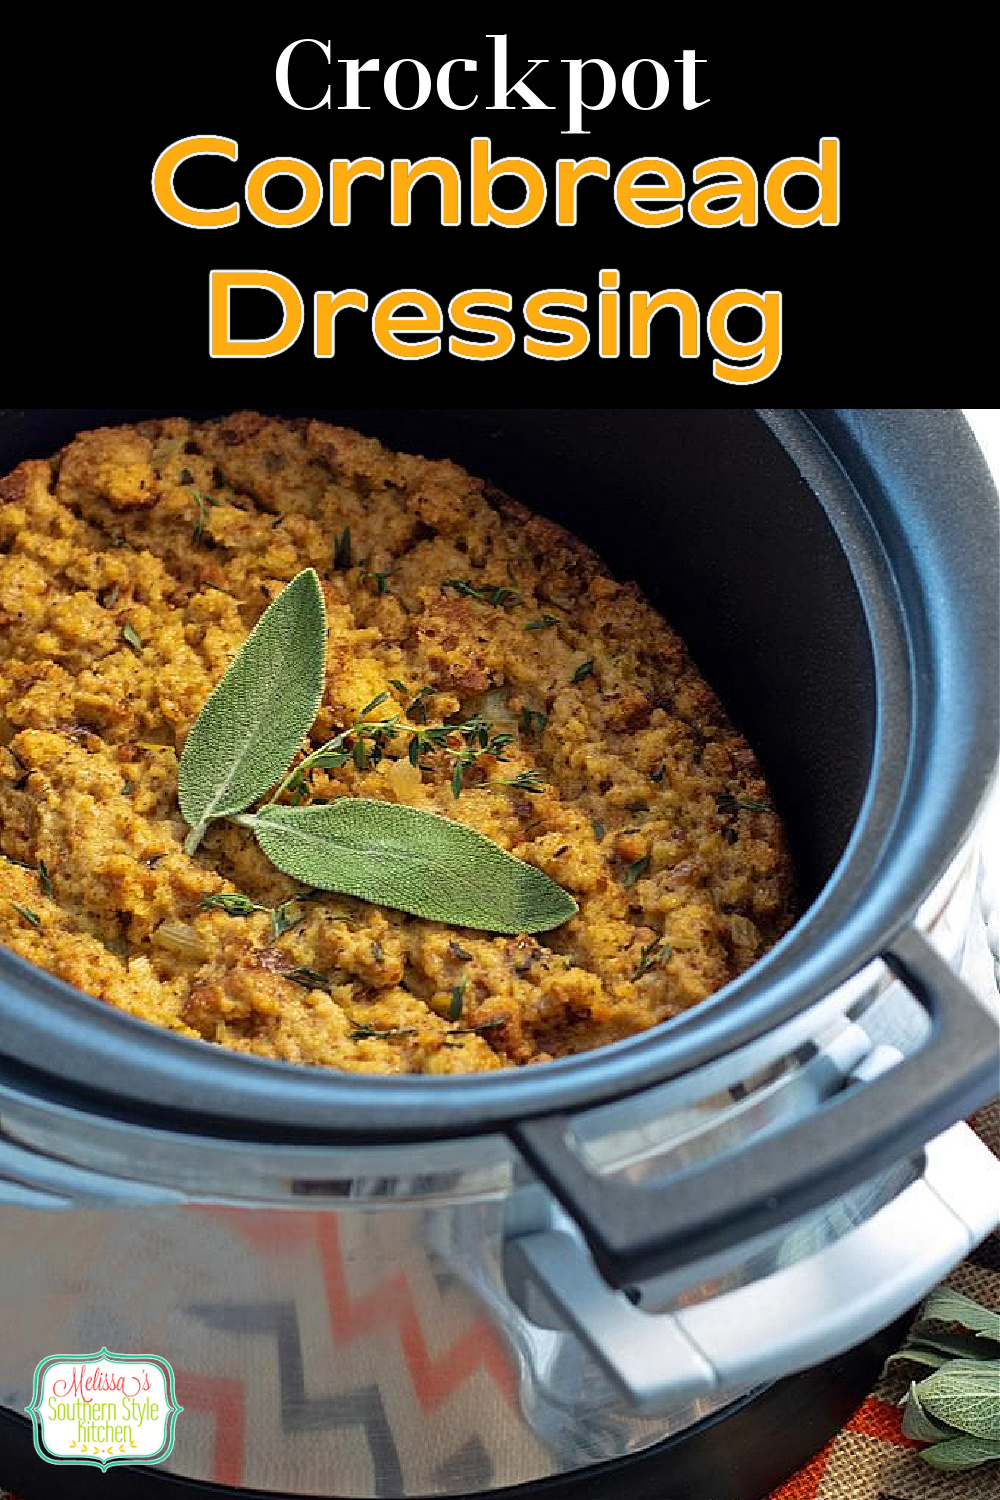 Free up oven space and make mouthwatering cornbread dressing in your crockpot #cornbreadressing #slowcookerrecipes #southerncornbreaddressing #crockpotdressing #easycornbreaddressing #bestthanksgivingrecipes